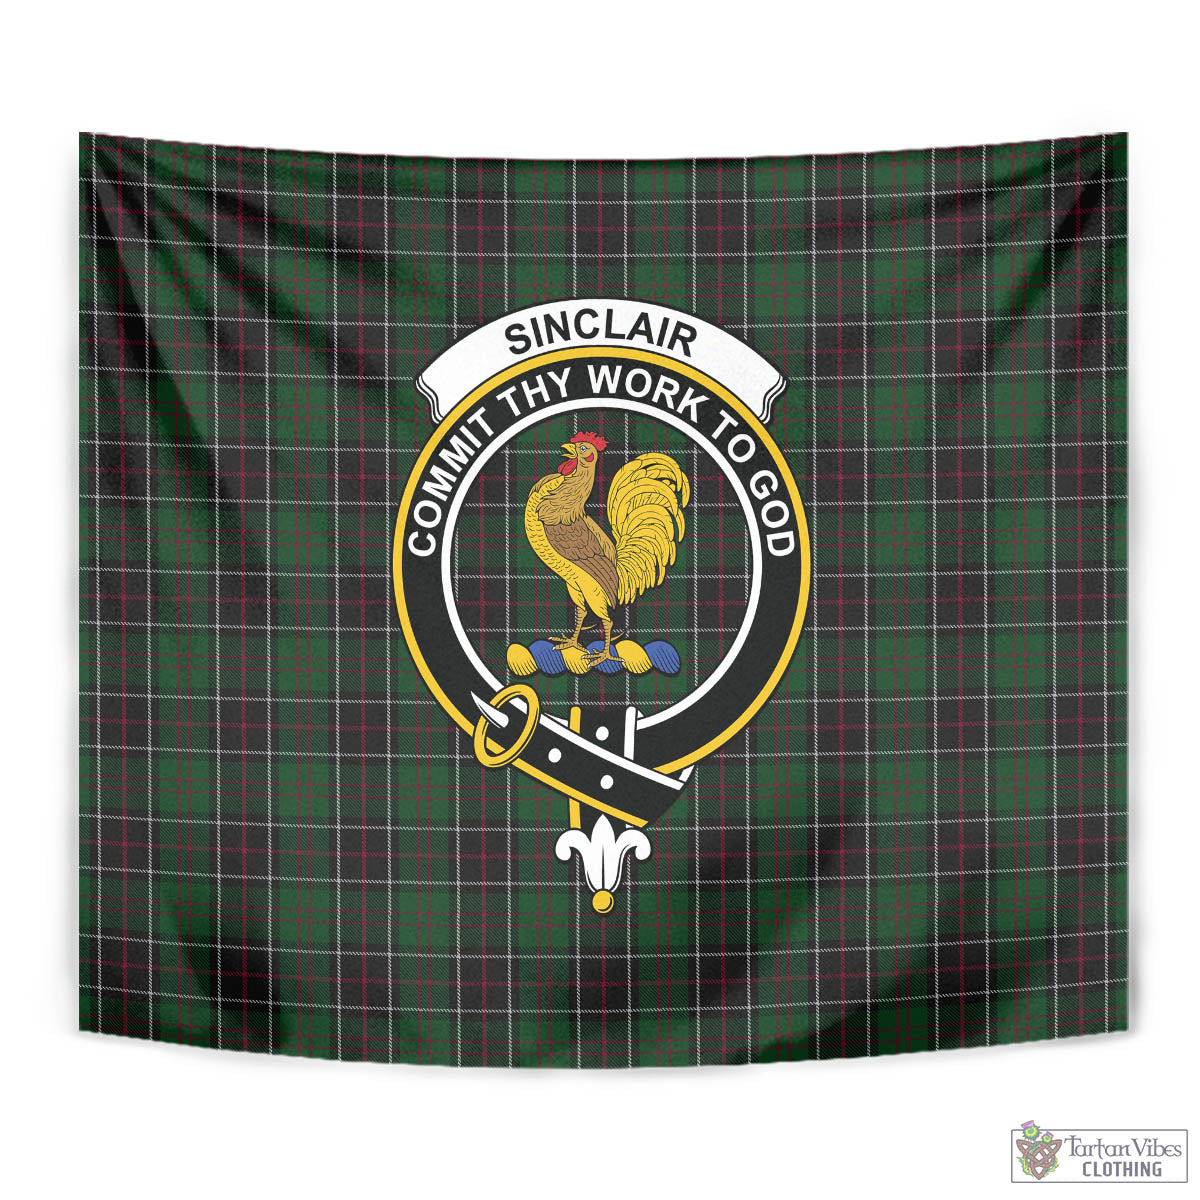 Tartan Vibes Clothing Sinclair Hunting Tartan Tapestry Wall Hanging and Home Decor for Room with Family Crest